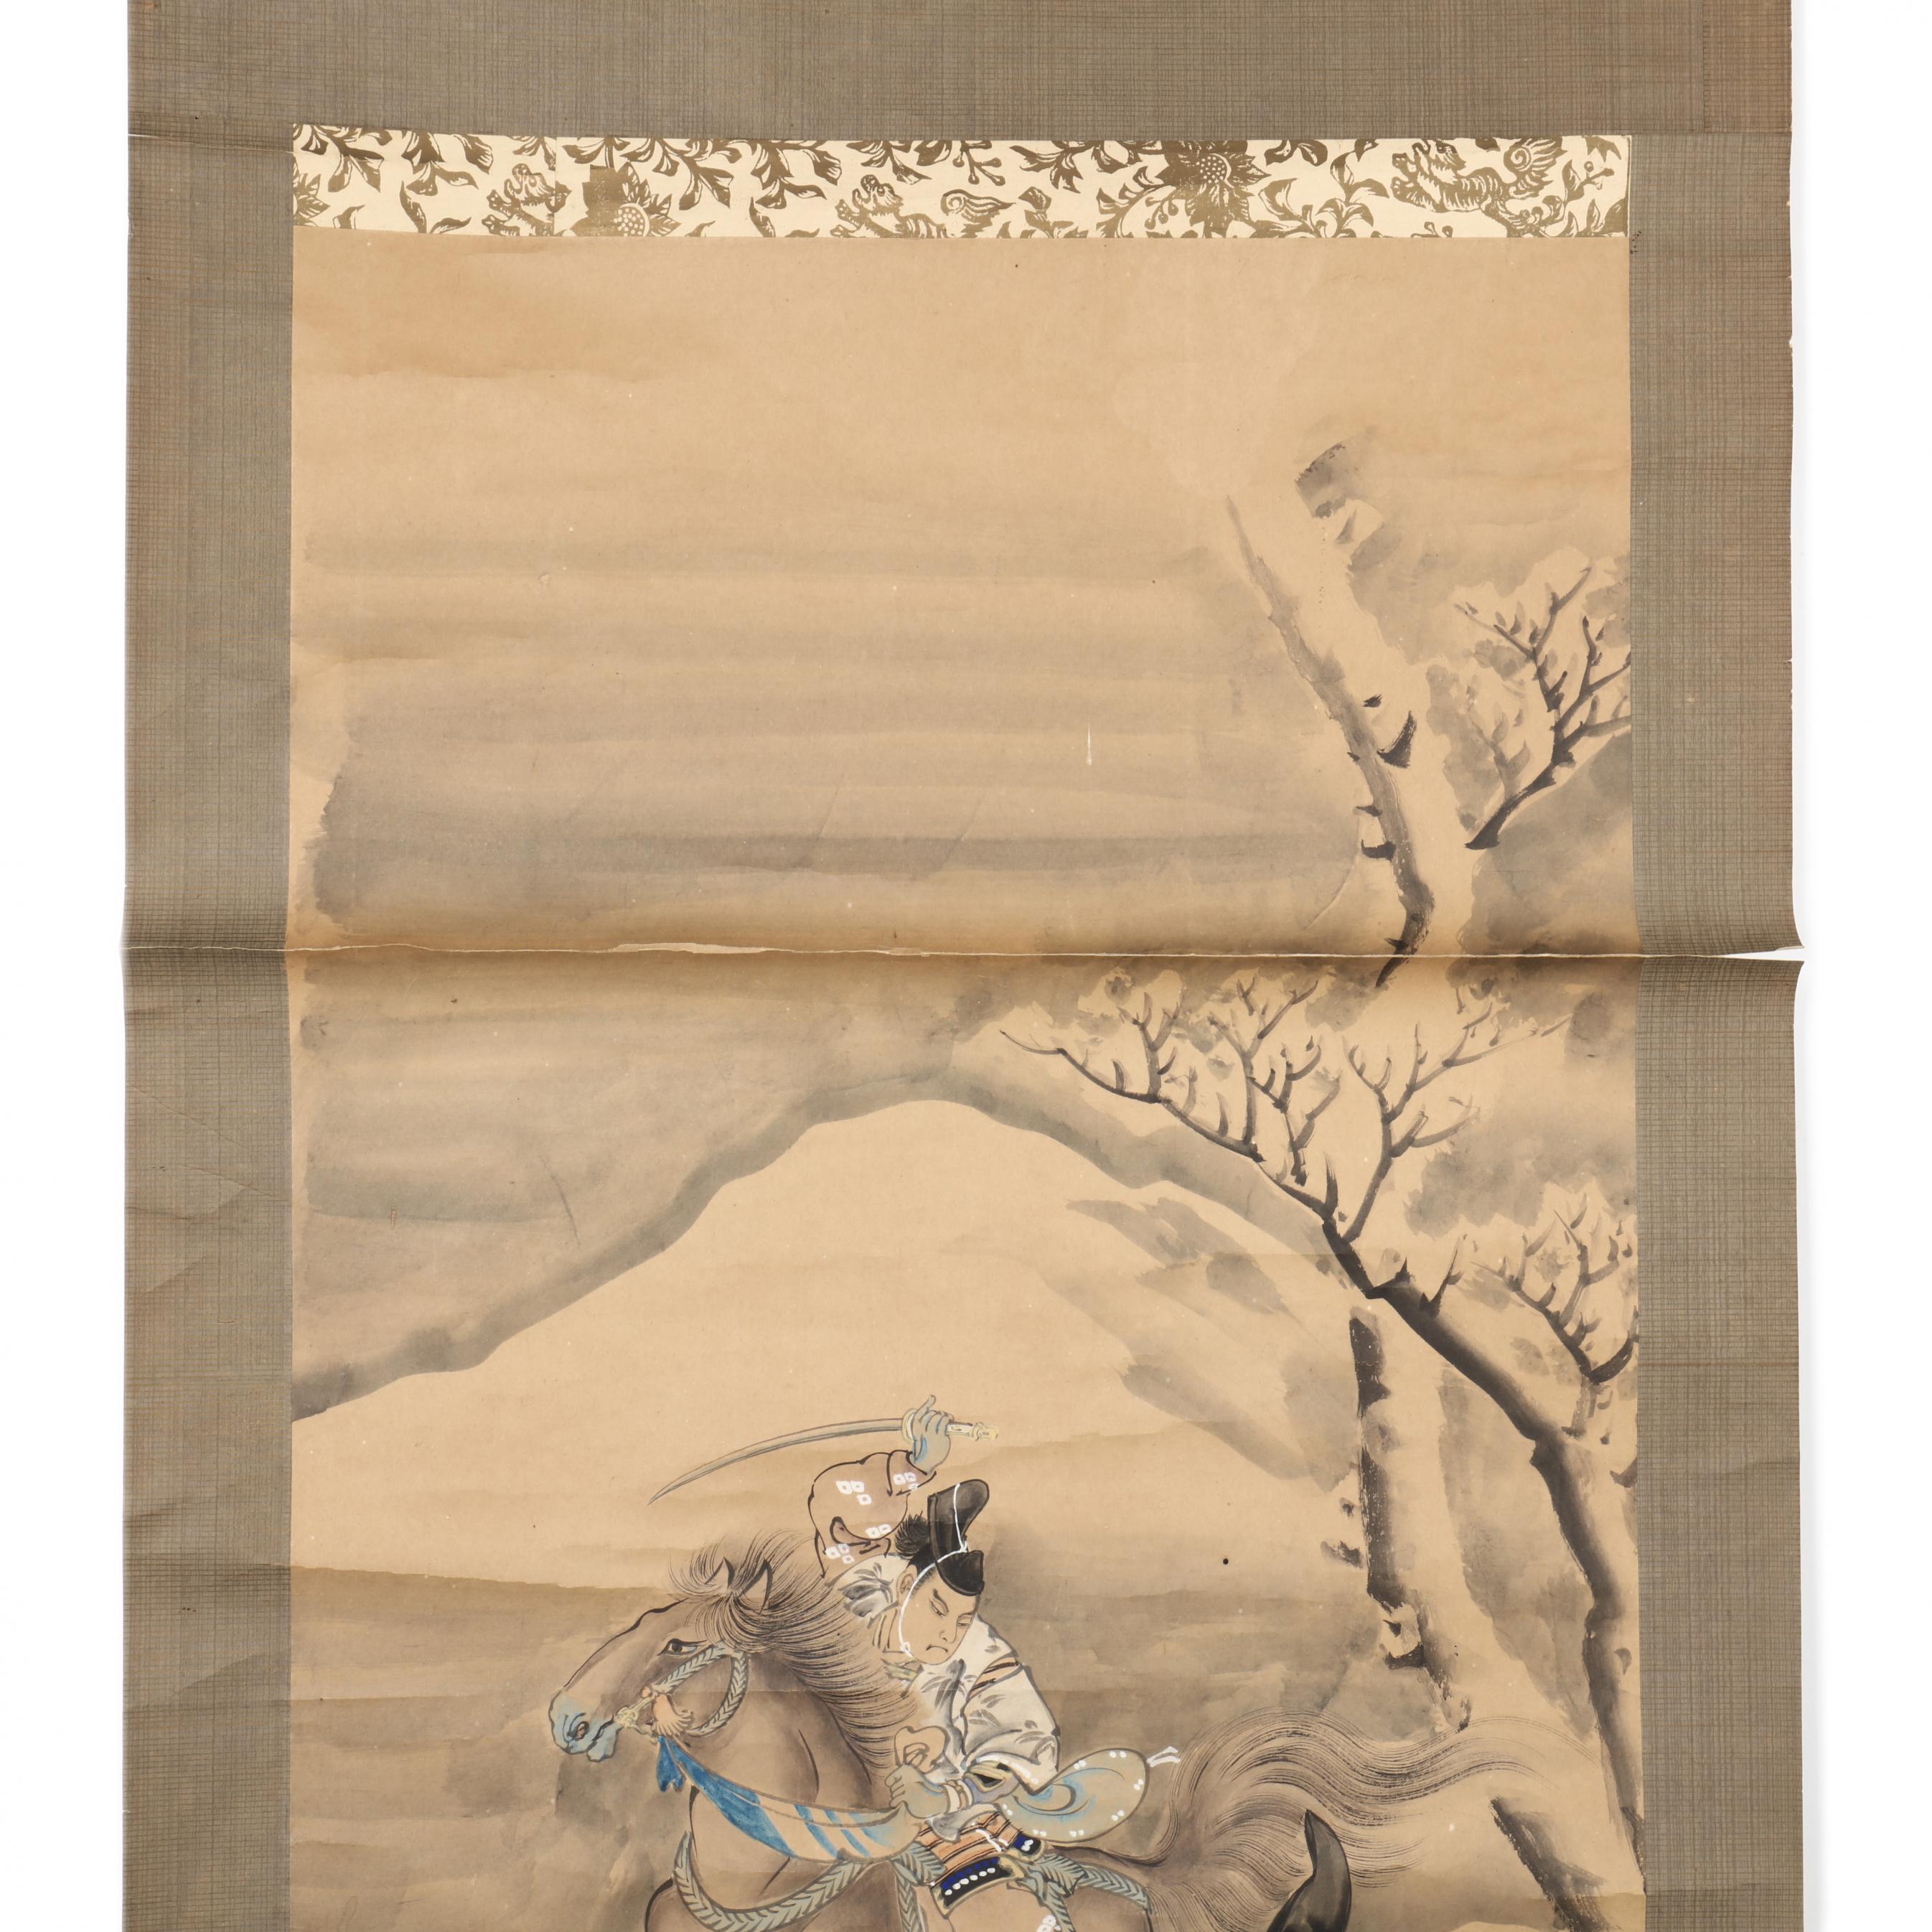 A Group of Four Japanese Kakemono Hanging Scrolls (Lot 1029 - The